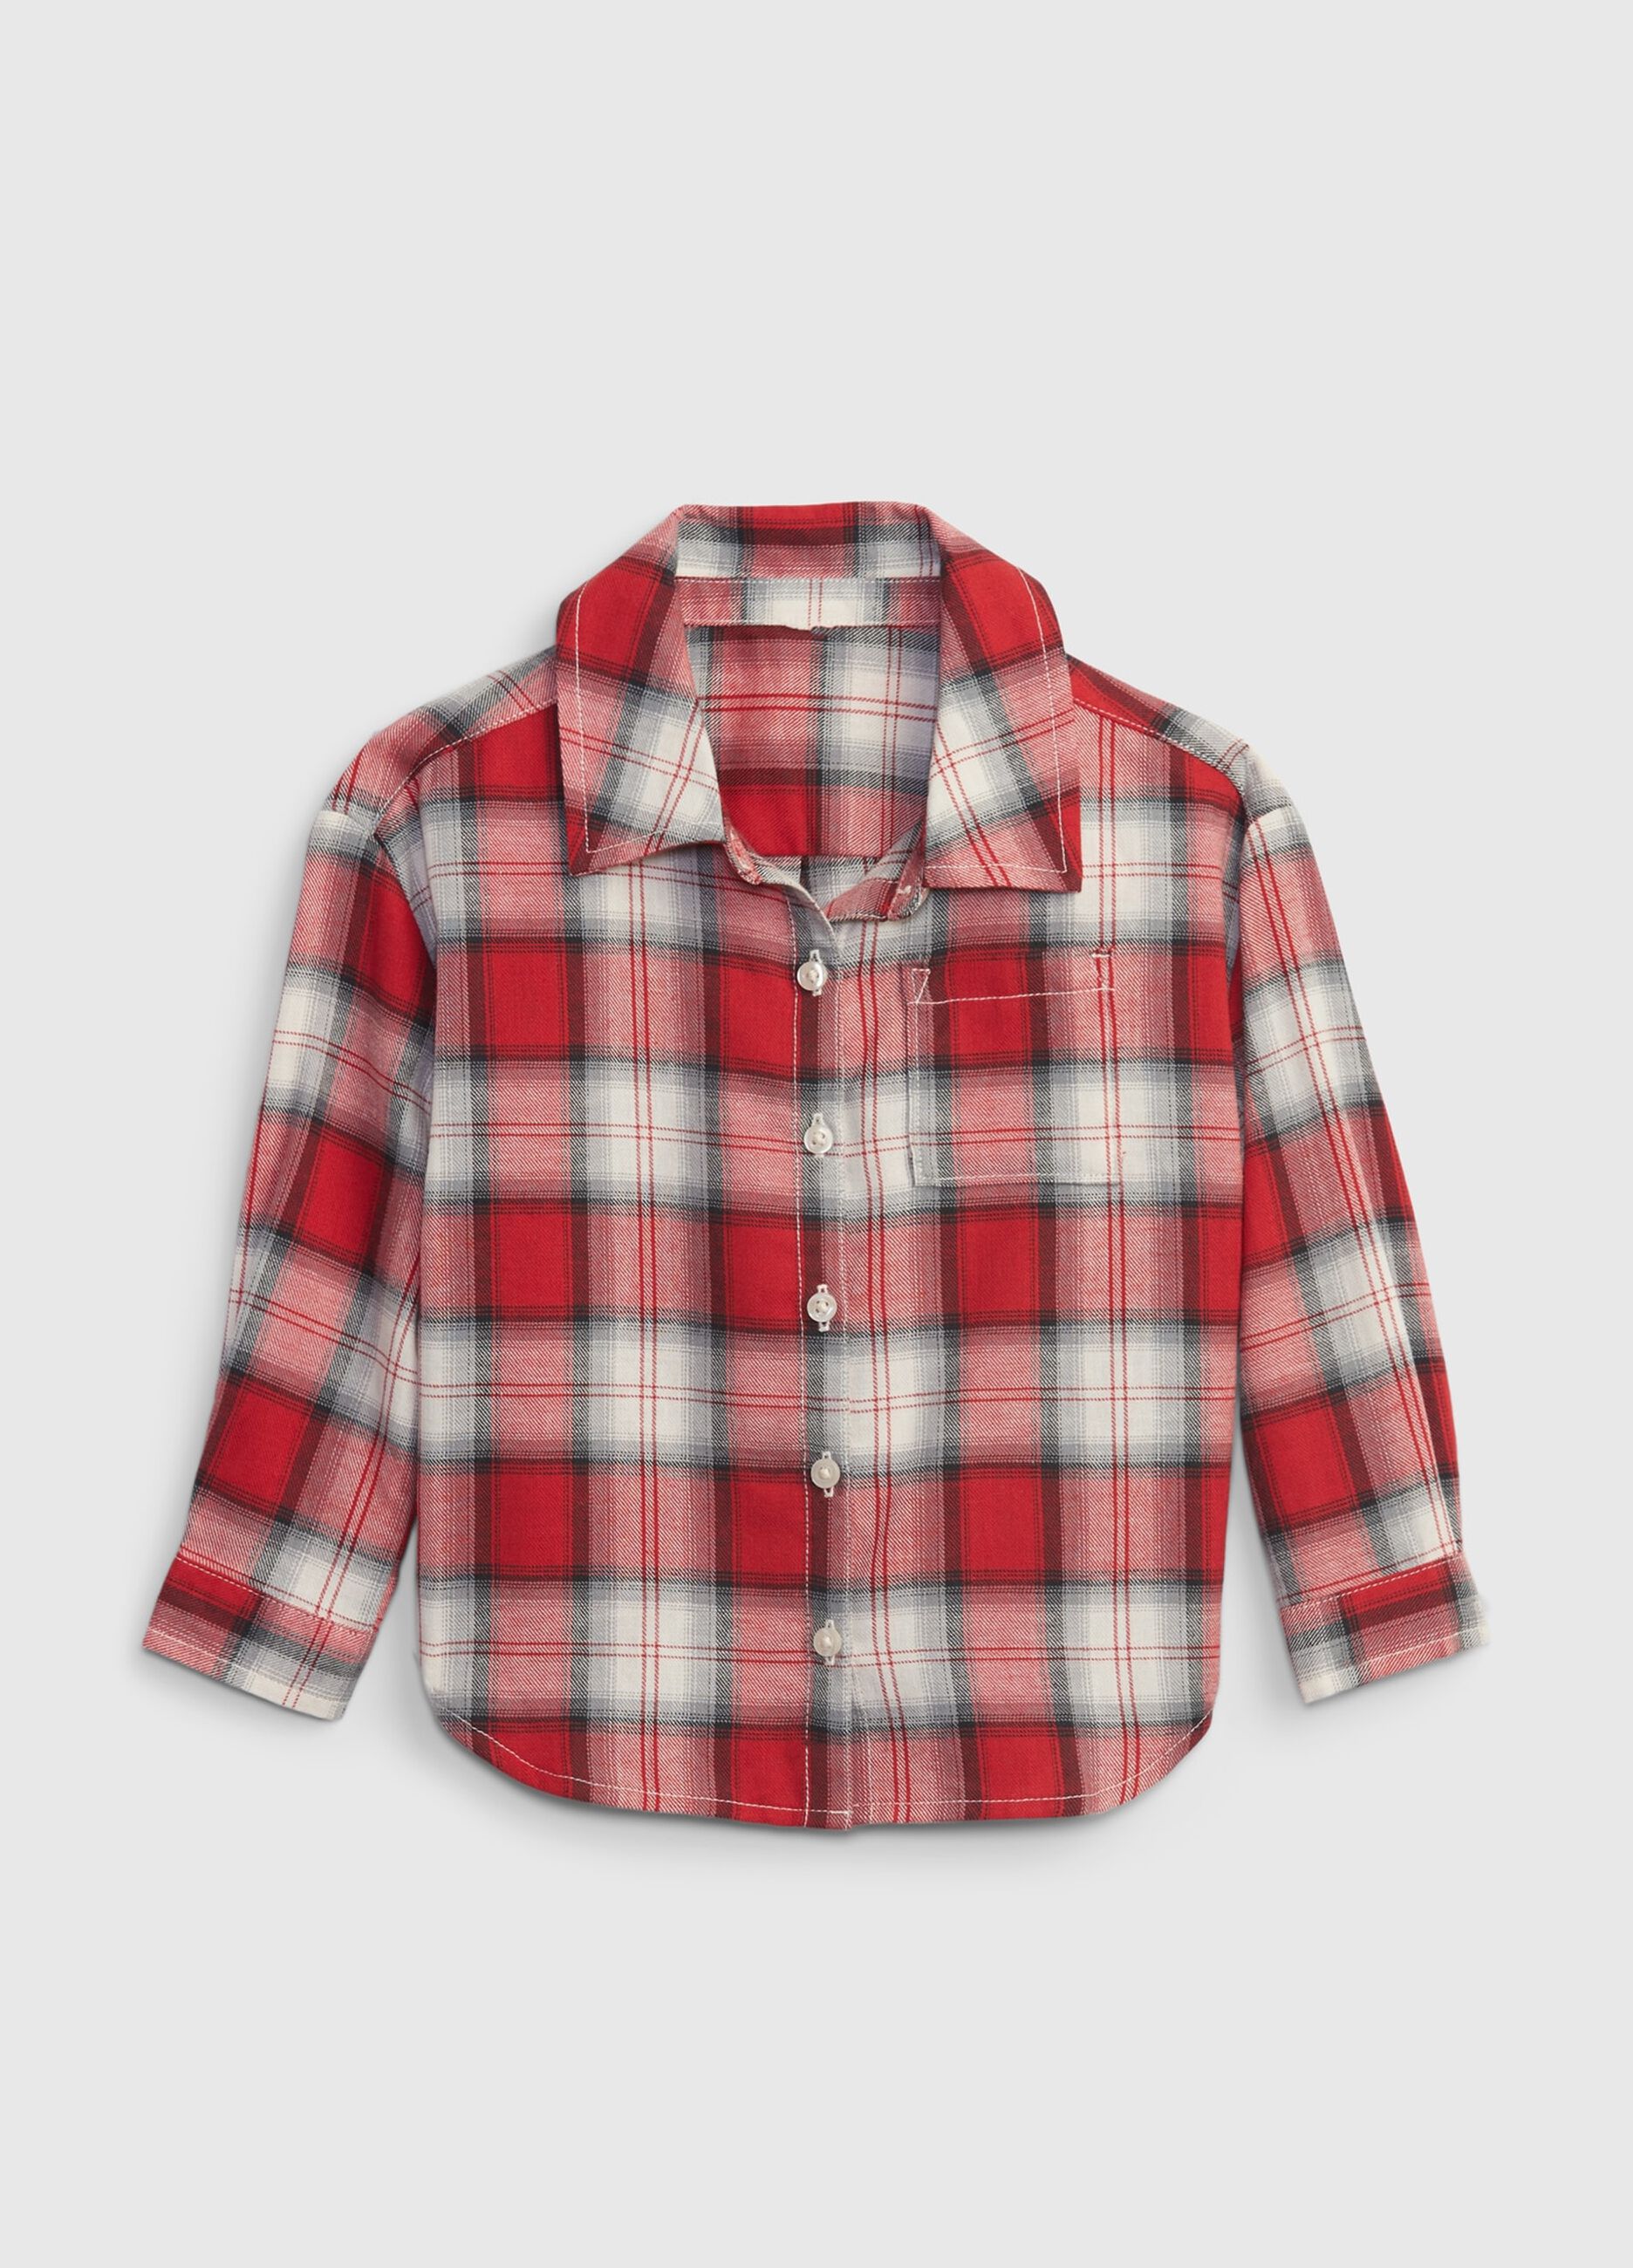 Flannel shirt in check pattern